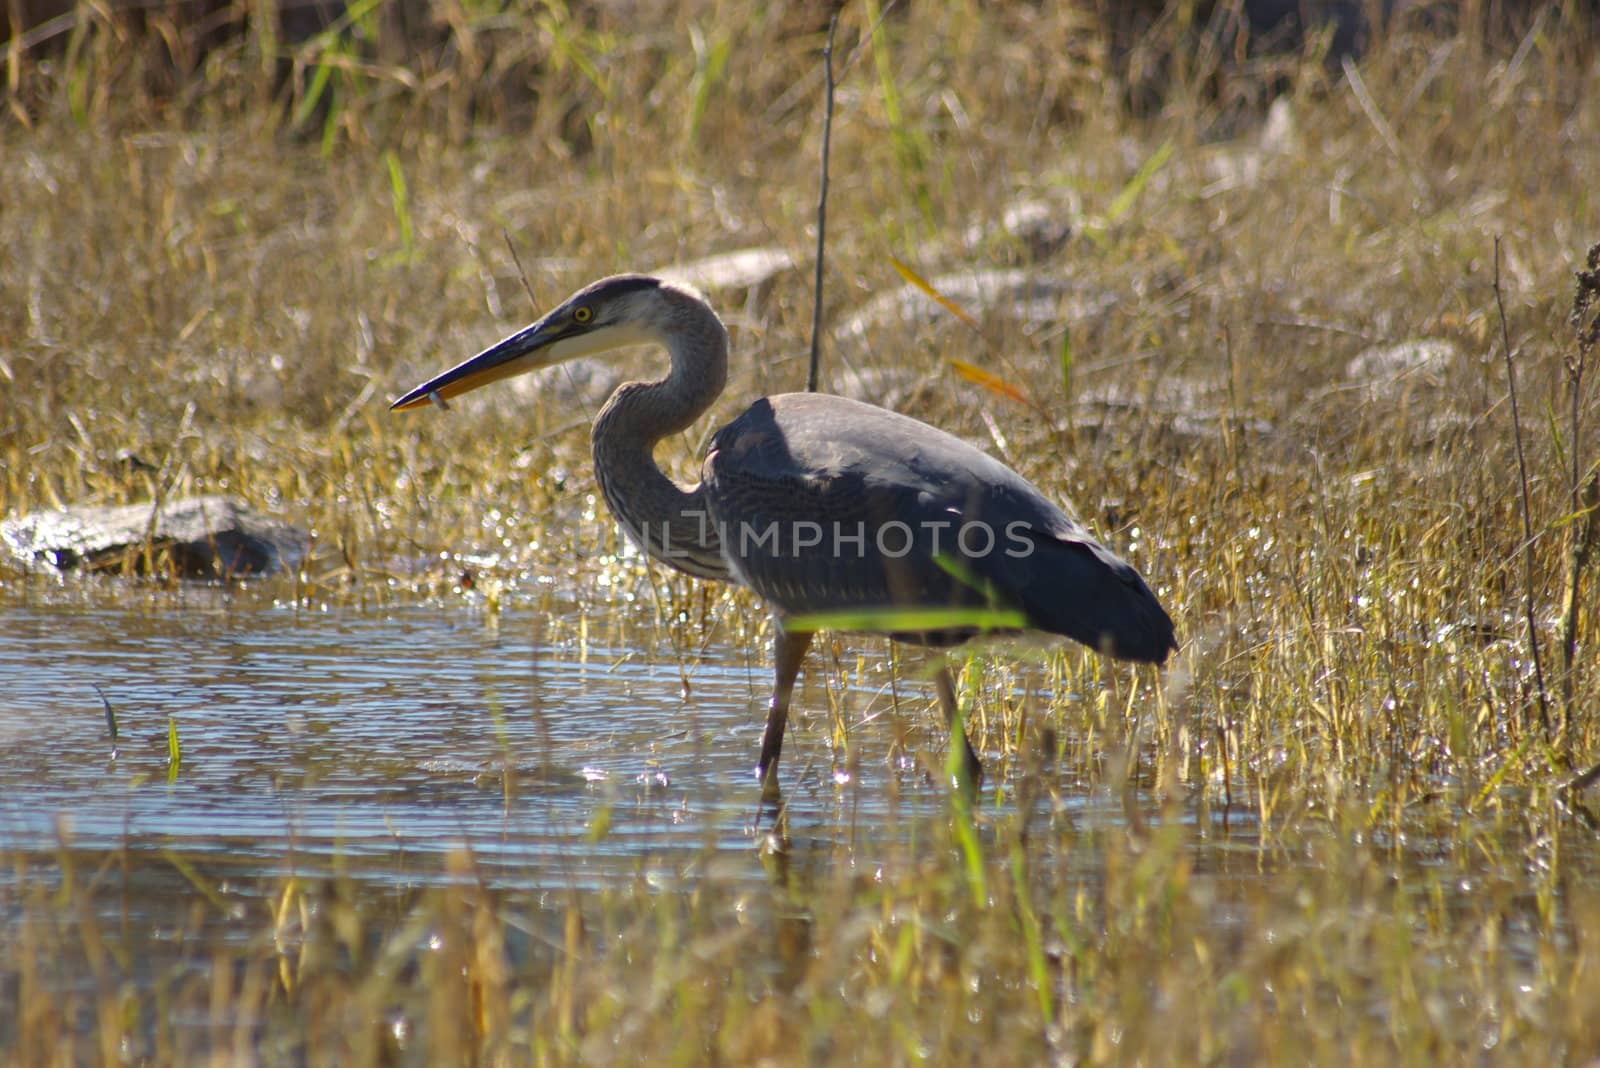 Heron in a pond